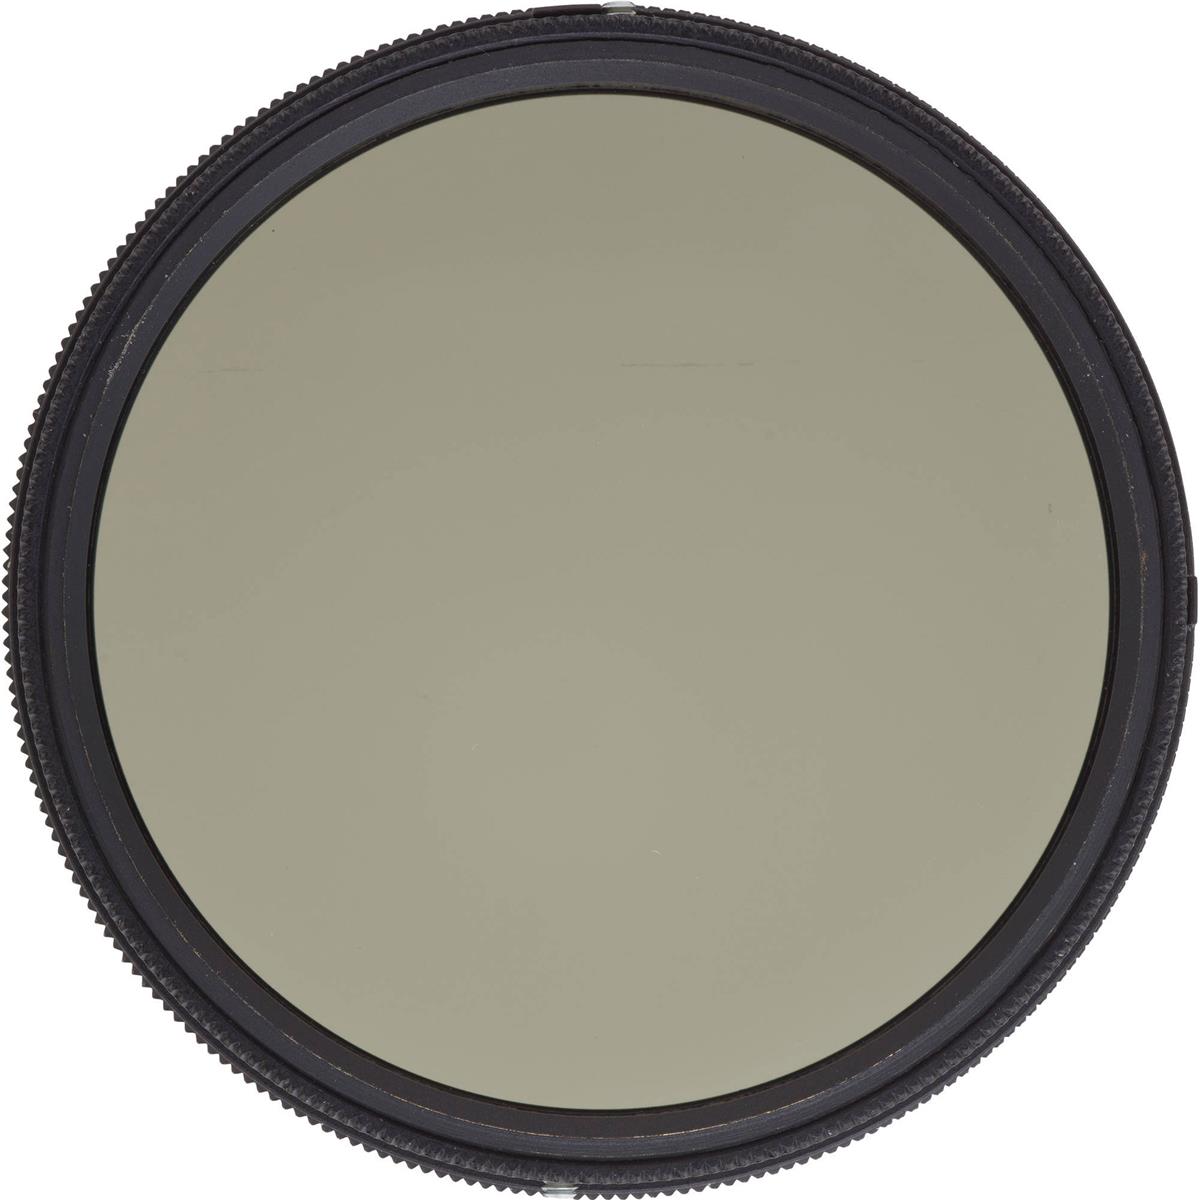 Heliopan 82mm Variable Gray ND Filter (1-6 Stops)